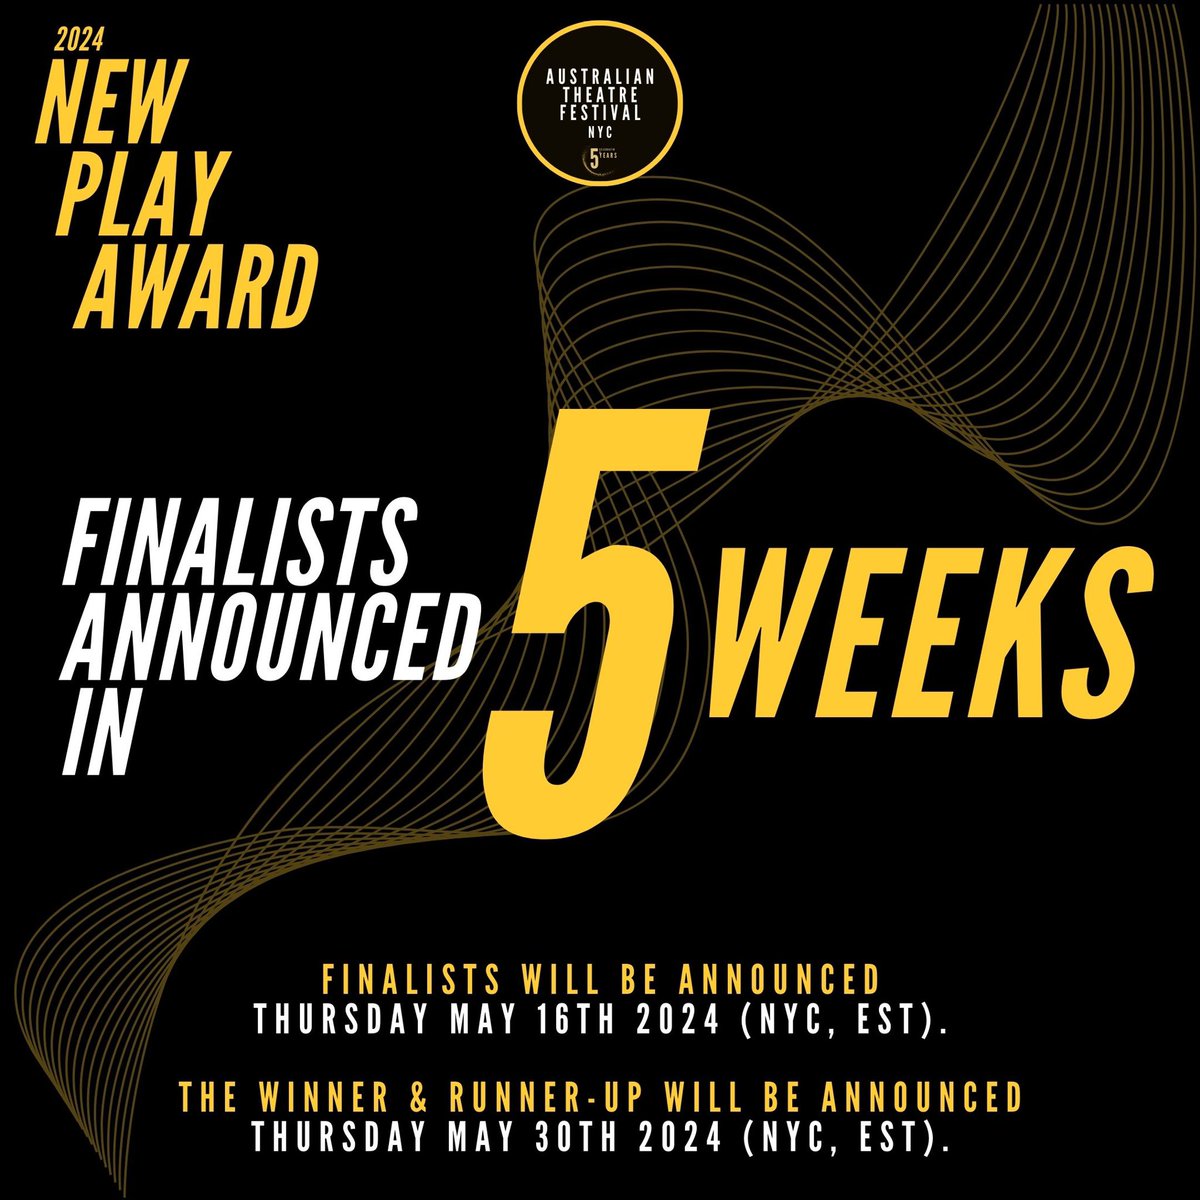 👀 Our 2024 #NewPlayAward FINALISTS will be announced in 5 weeks time! 
🗓 Thursday May 16th, 2024 (NYC, EST)
.
.
.
#ATFNewPlayAward #AusTheatreFestNYC #ATFNYC #AustralianTheatreFestivalNYC #NewPlayAward #AussiePlays #NewAussiePlays #AustralianTheatre #NewPlays #PlaywritingAward